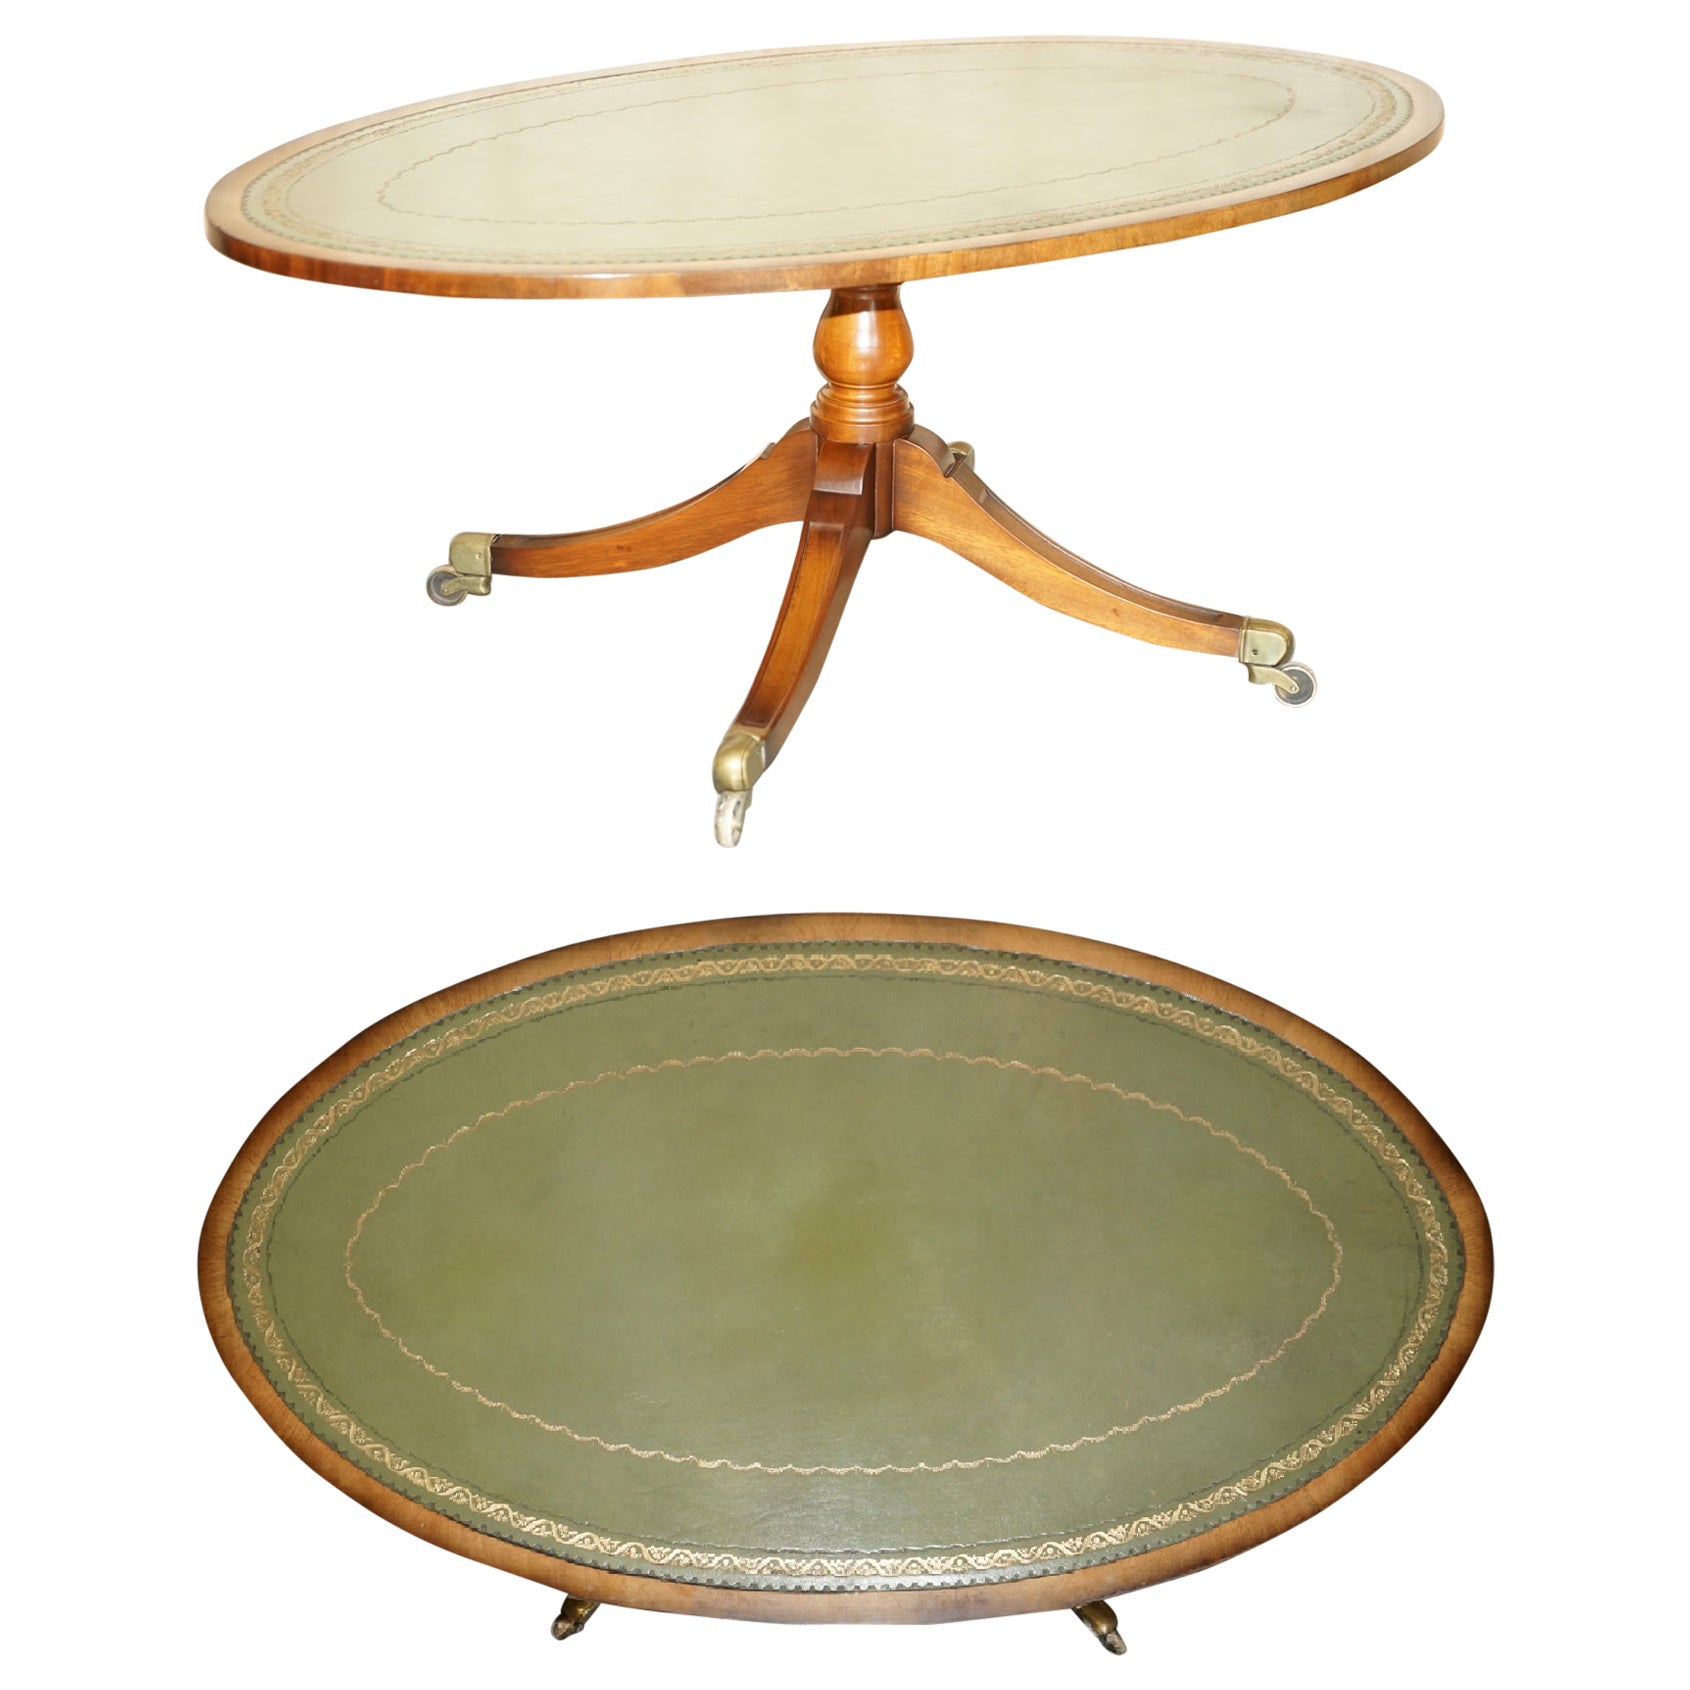 Stunning circa 1900 English Walnut Green Leather Brass Castor Oval Coffee Table For Sale